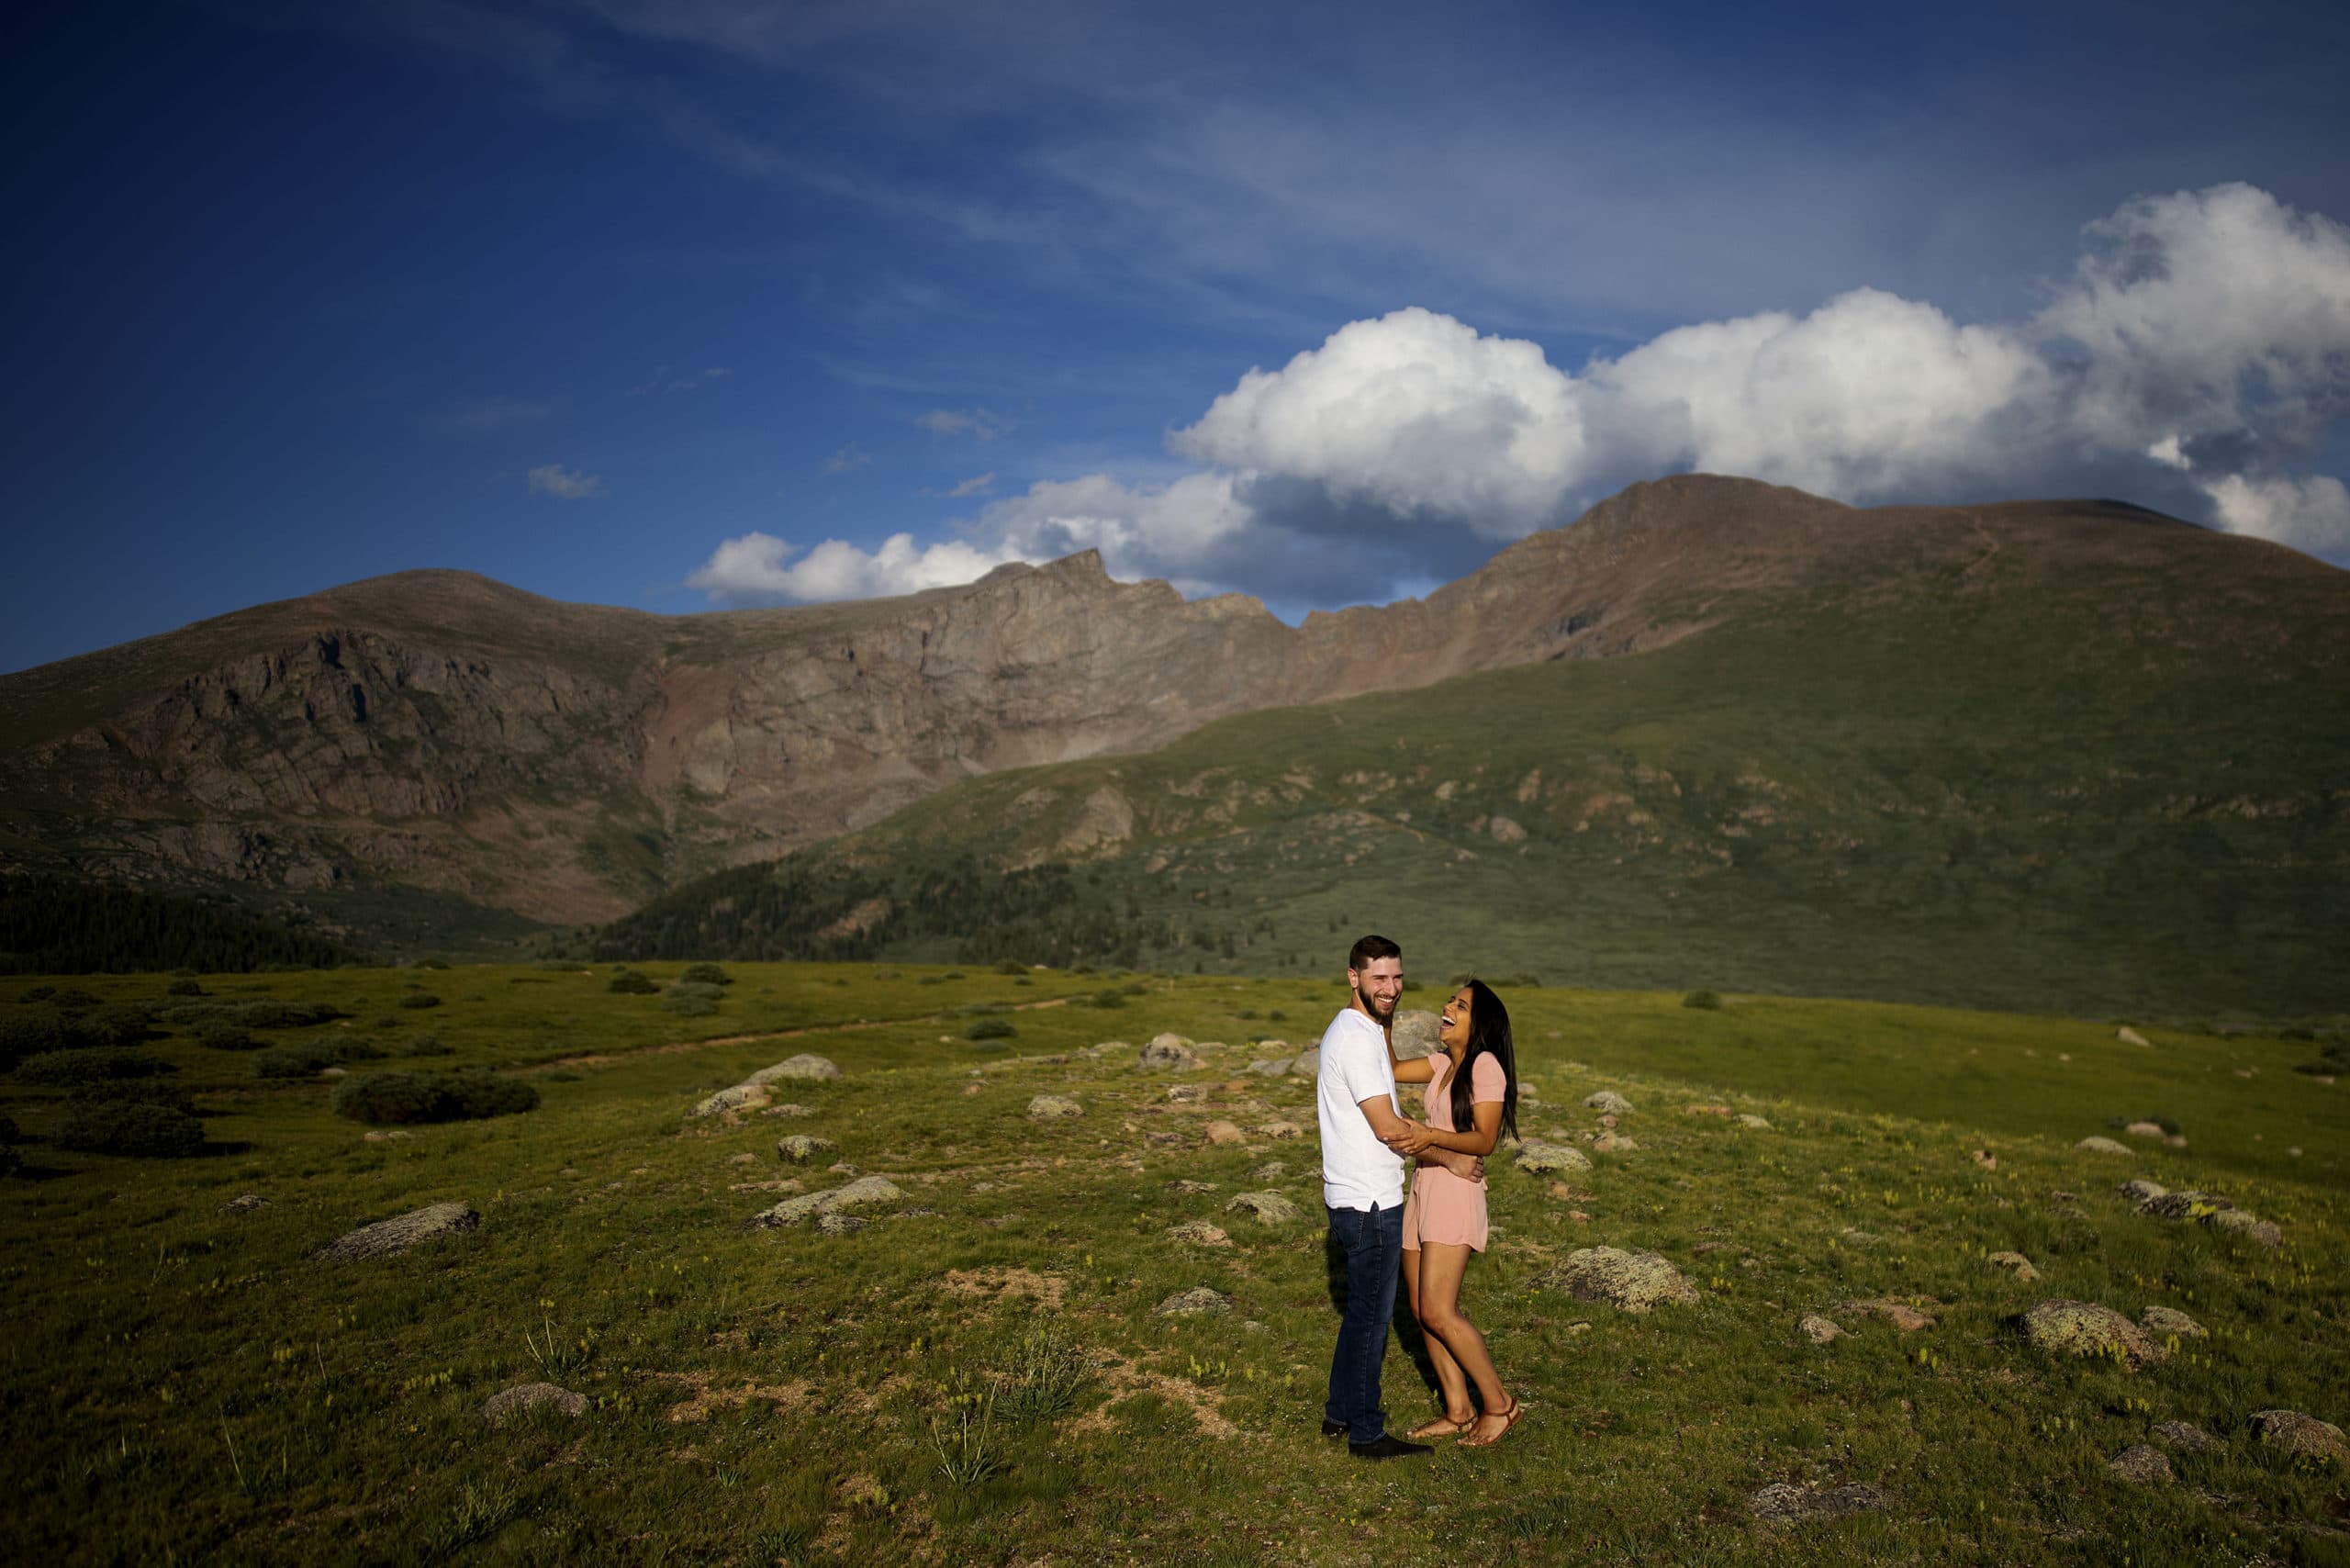 Laurie and James share a laugh after their surprise proposal on Guanella Pass